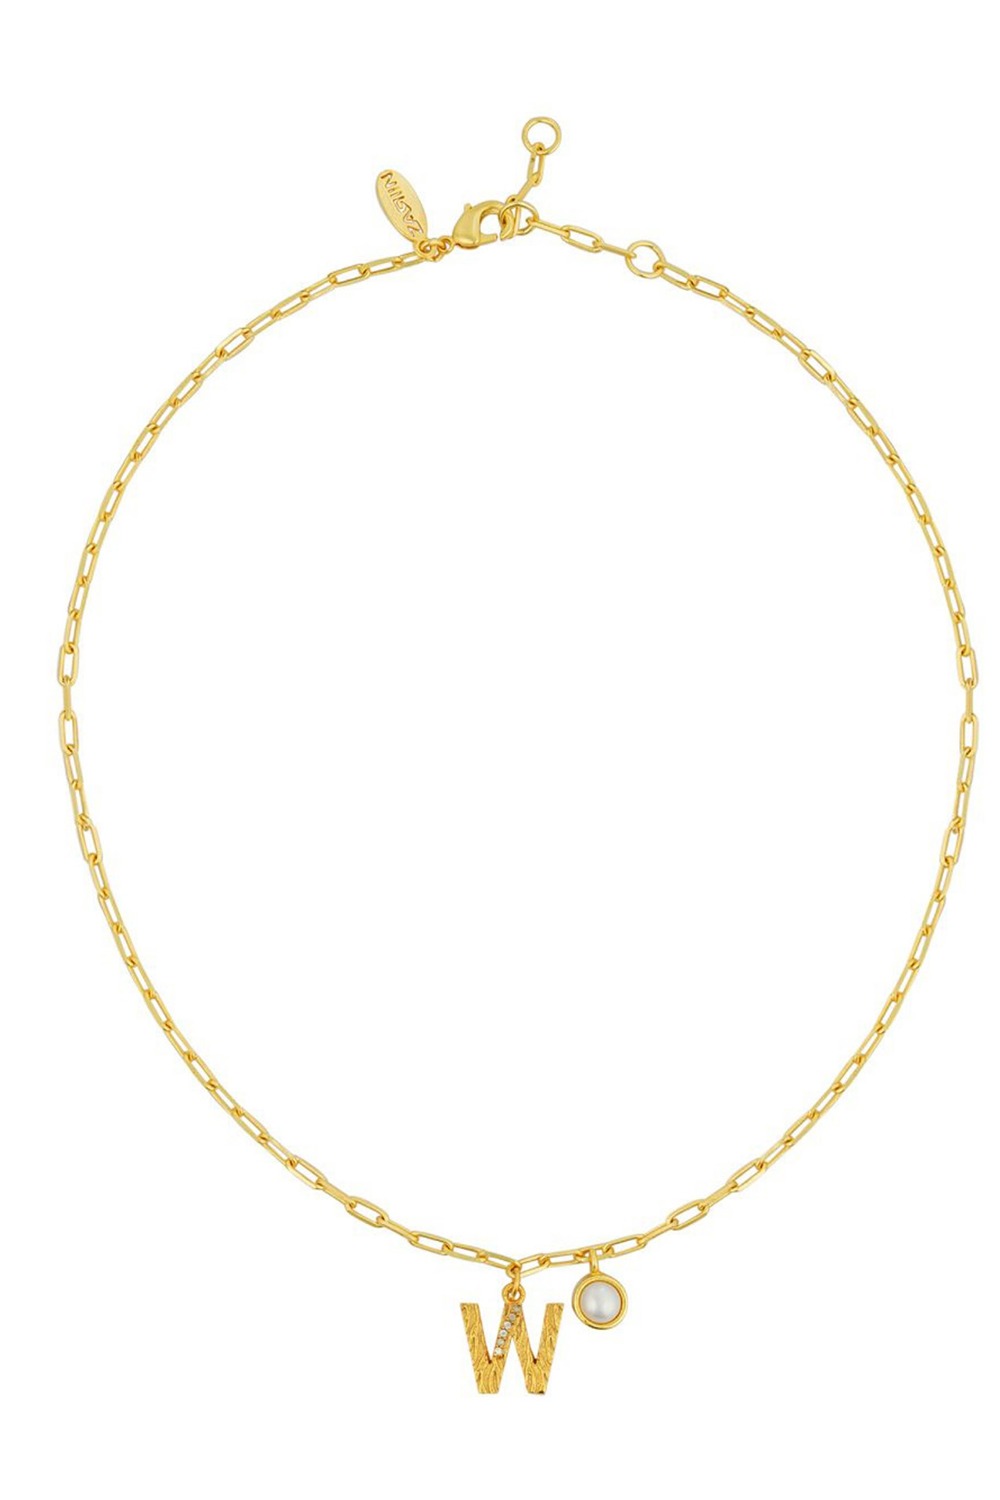 Gold Plated W Necklace  